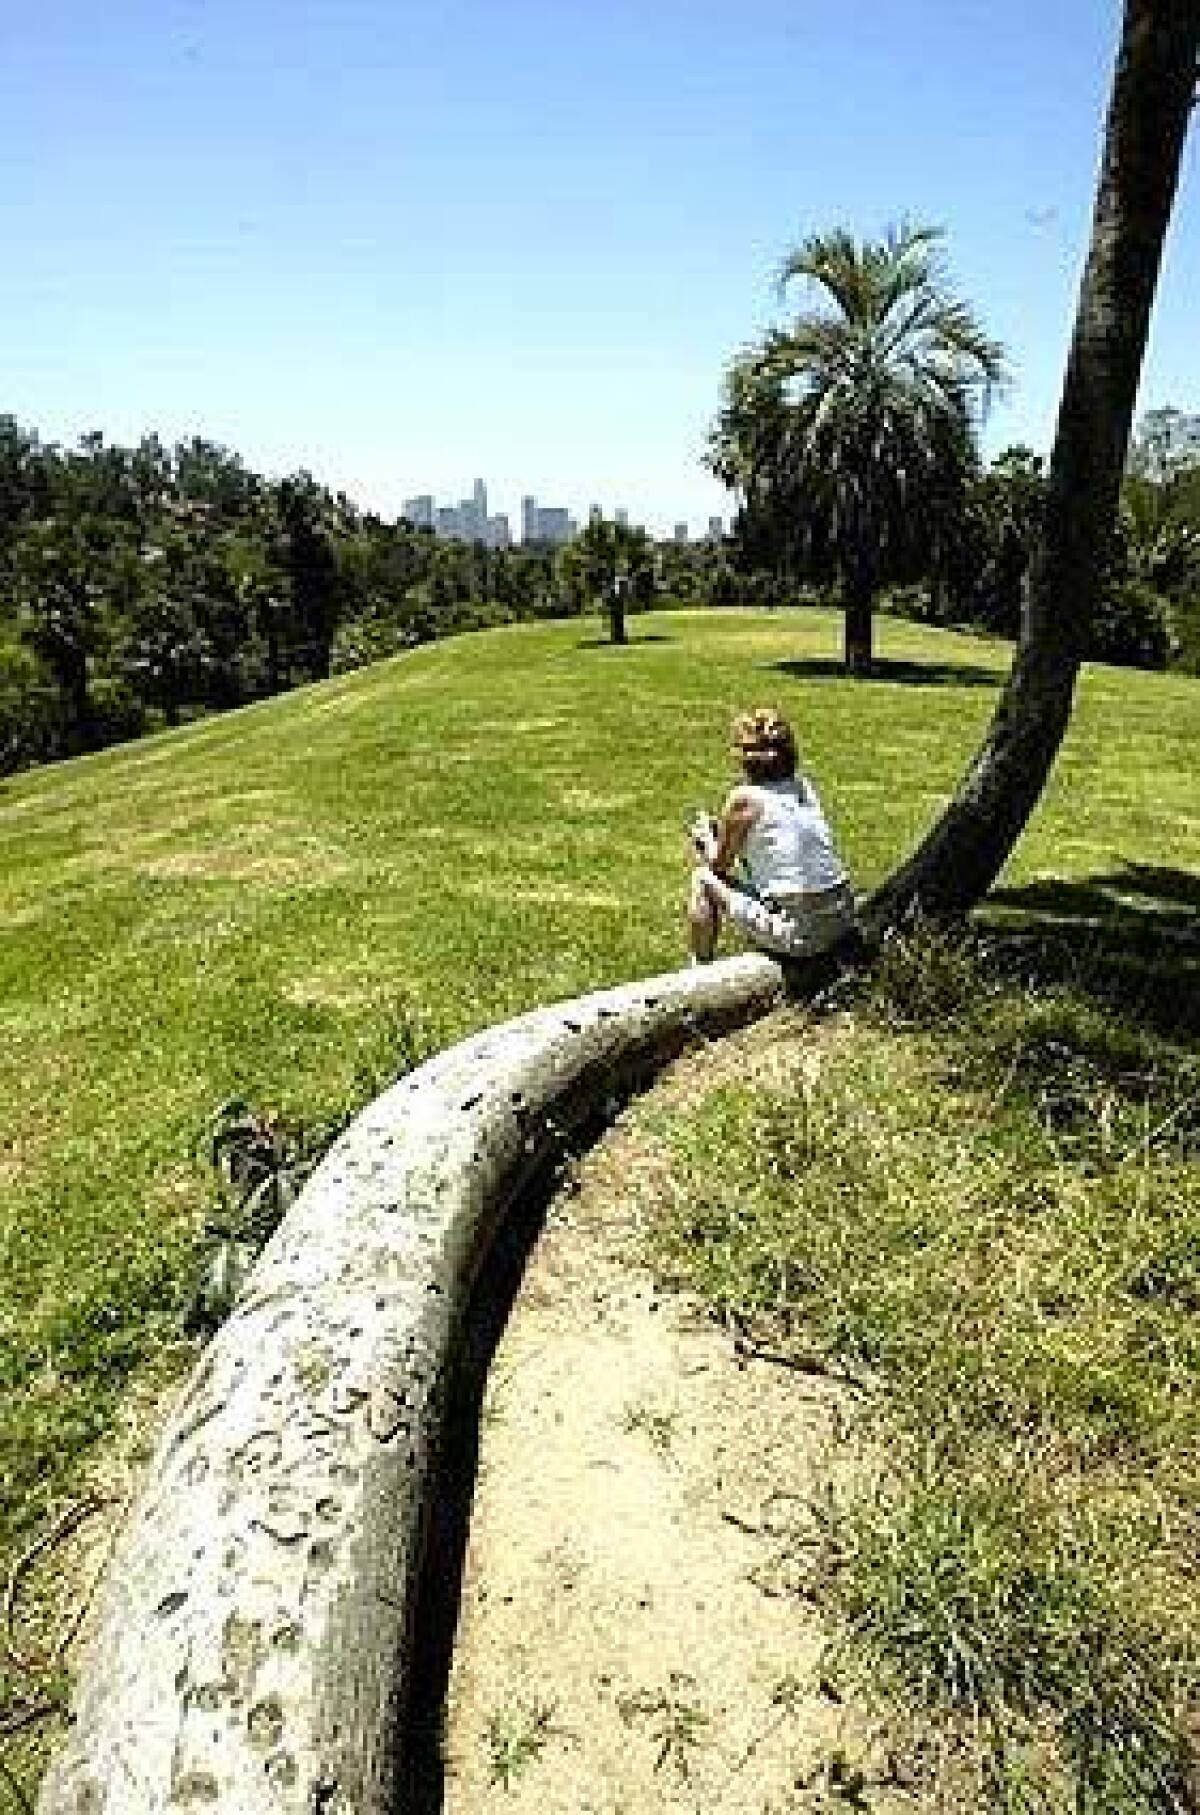 Olga Rothenbecker of Echo Park rests on the snaking trunk of a palm tree at Chavez Ravine Arboretum. Rare palm specimens were planted on Palm Hill in 1972.